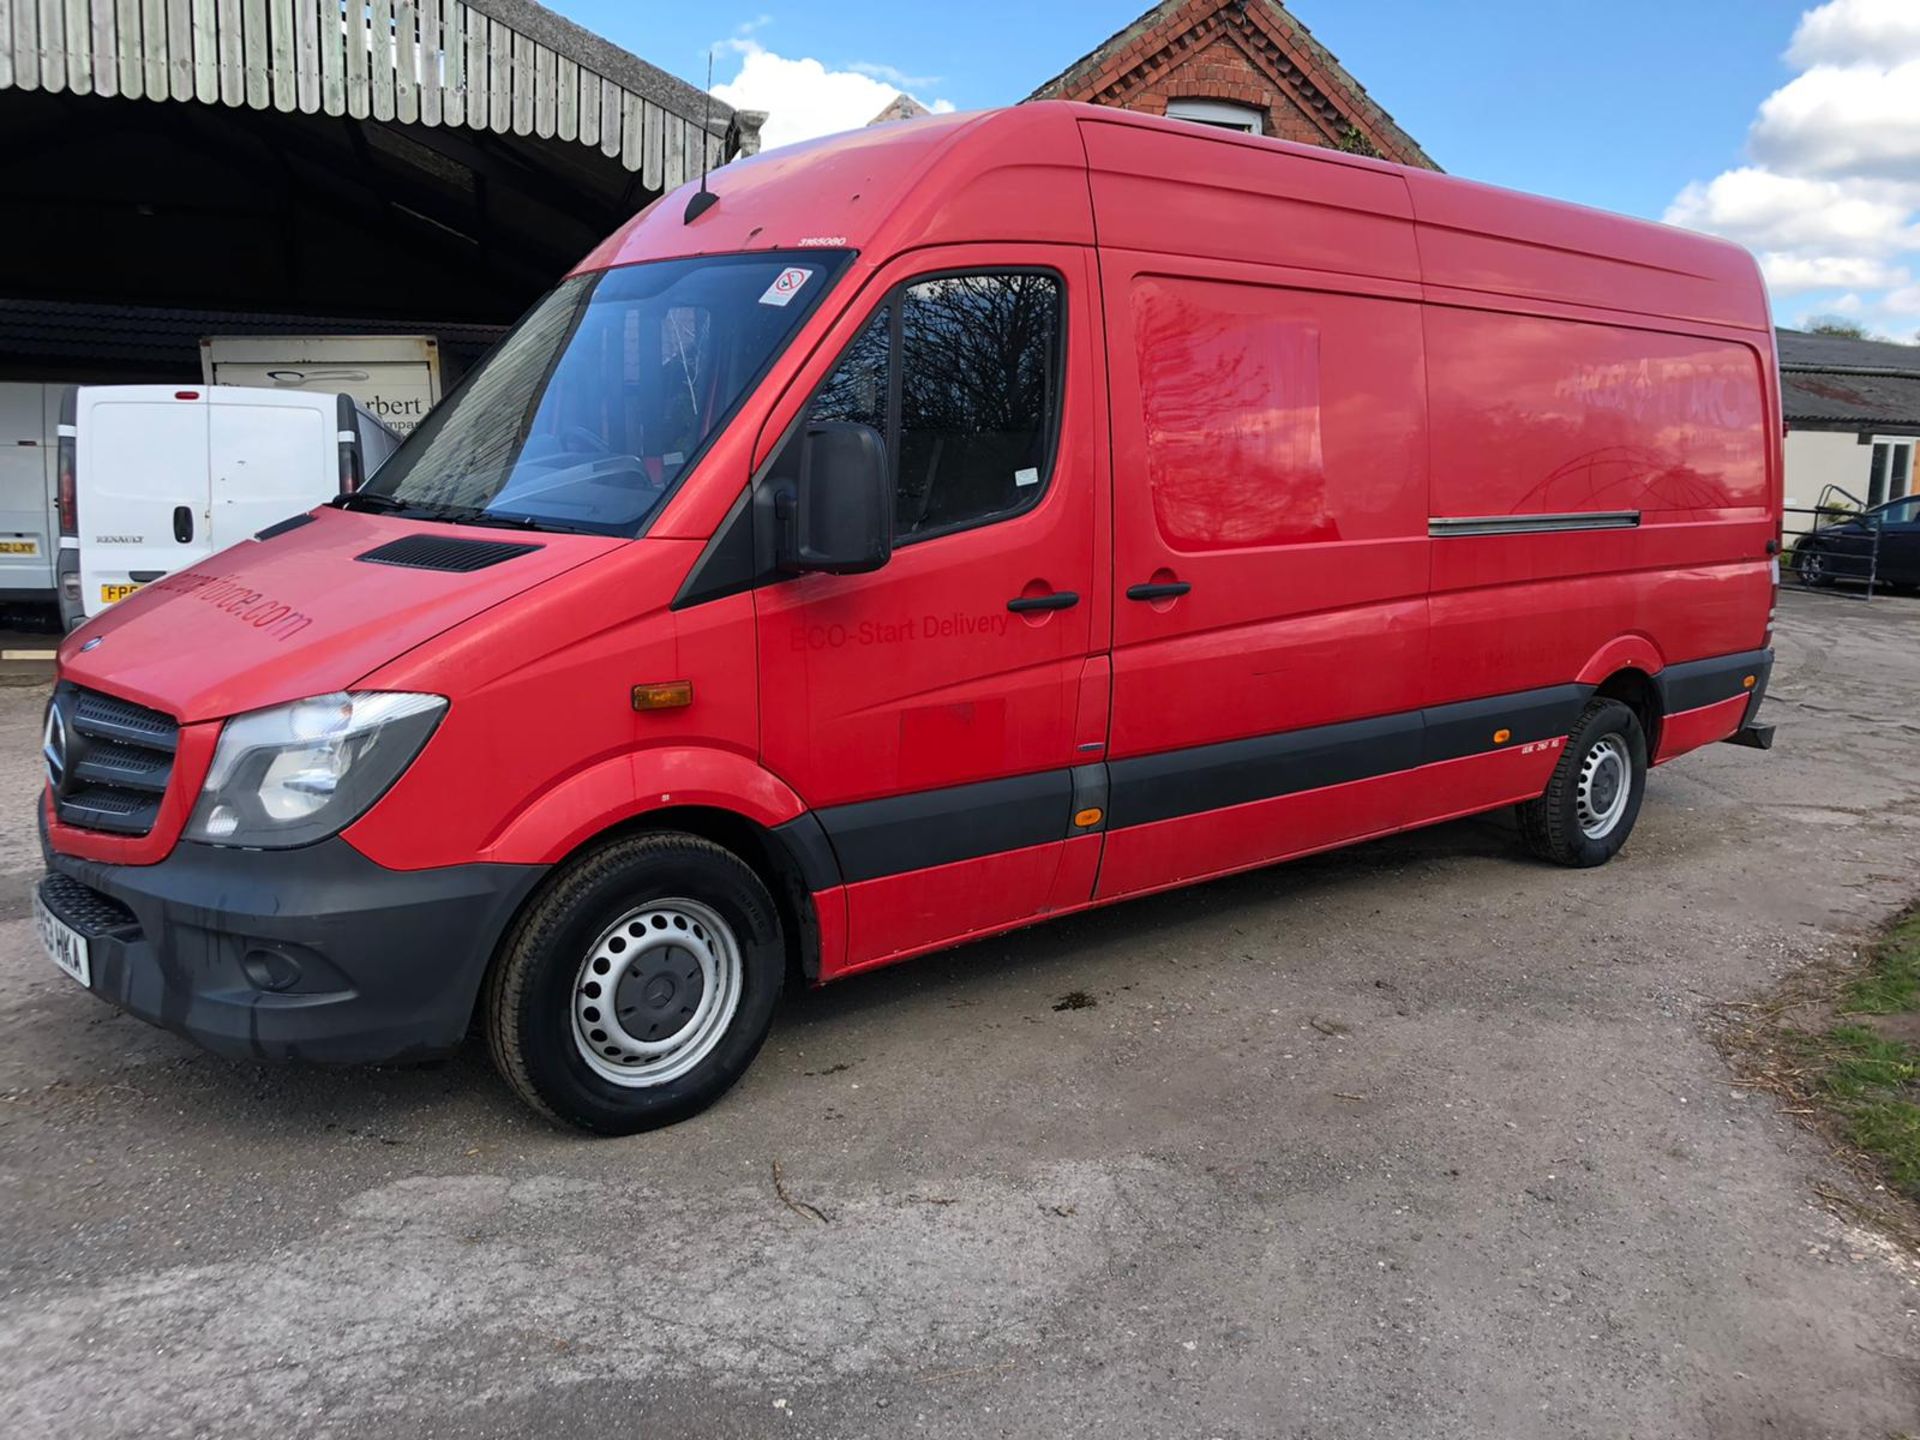 2013 MERCEDES-BENZ SPRINTER 310 CDI BLUE EFFICIENCY, DIESEL ENGINE, SHOWING 0 PREVIOUS KEEPERS - Image 2 of 12